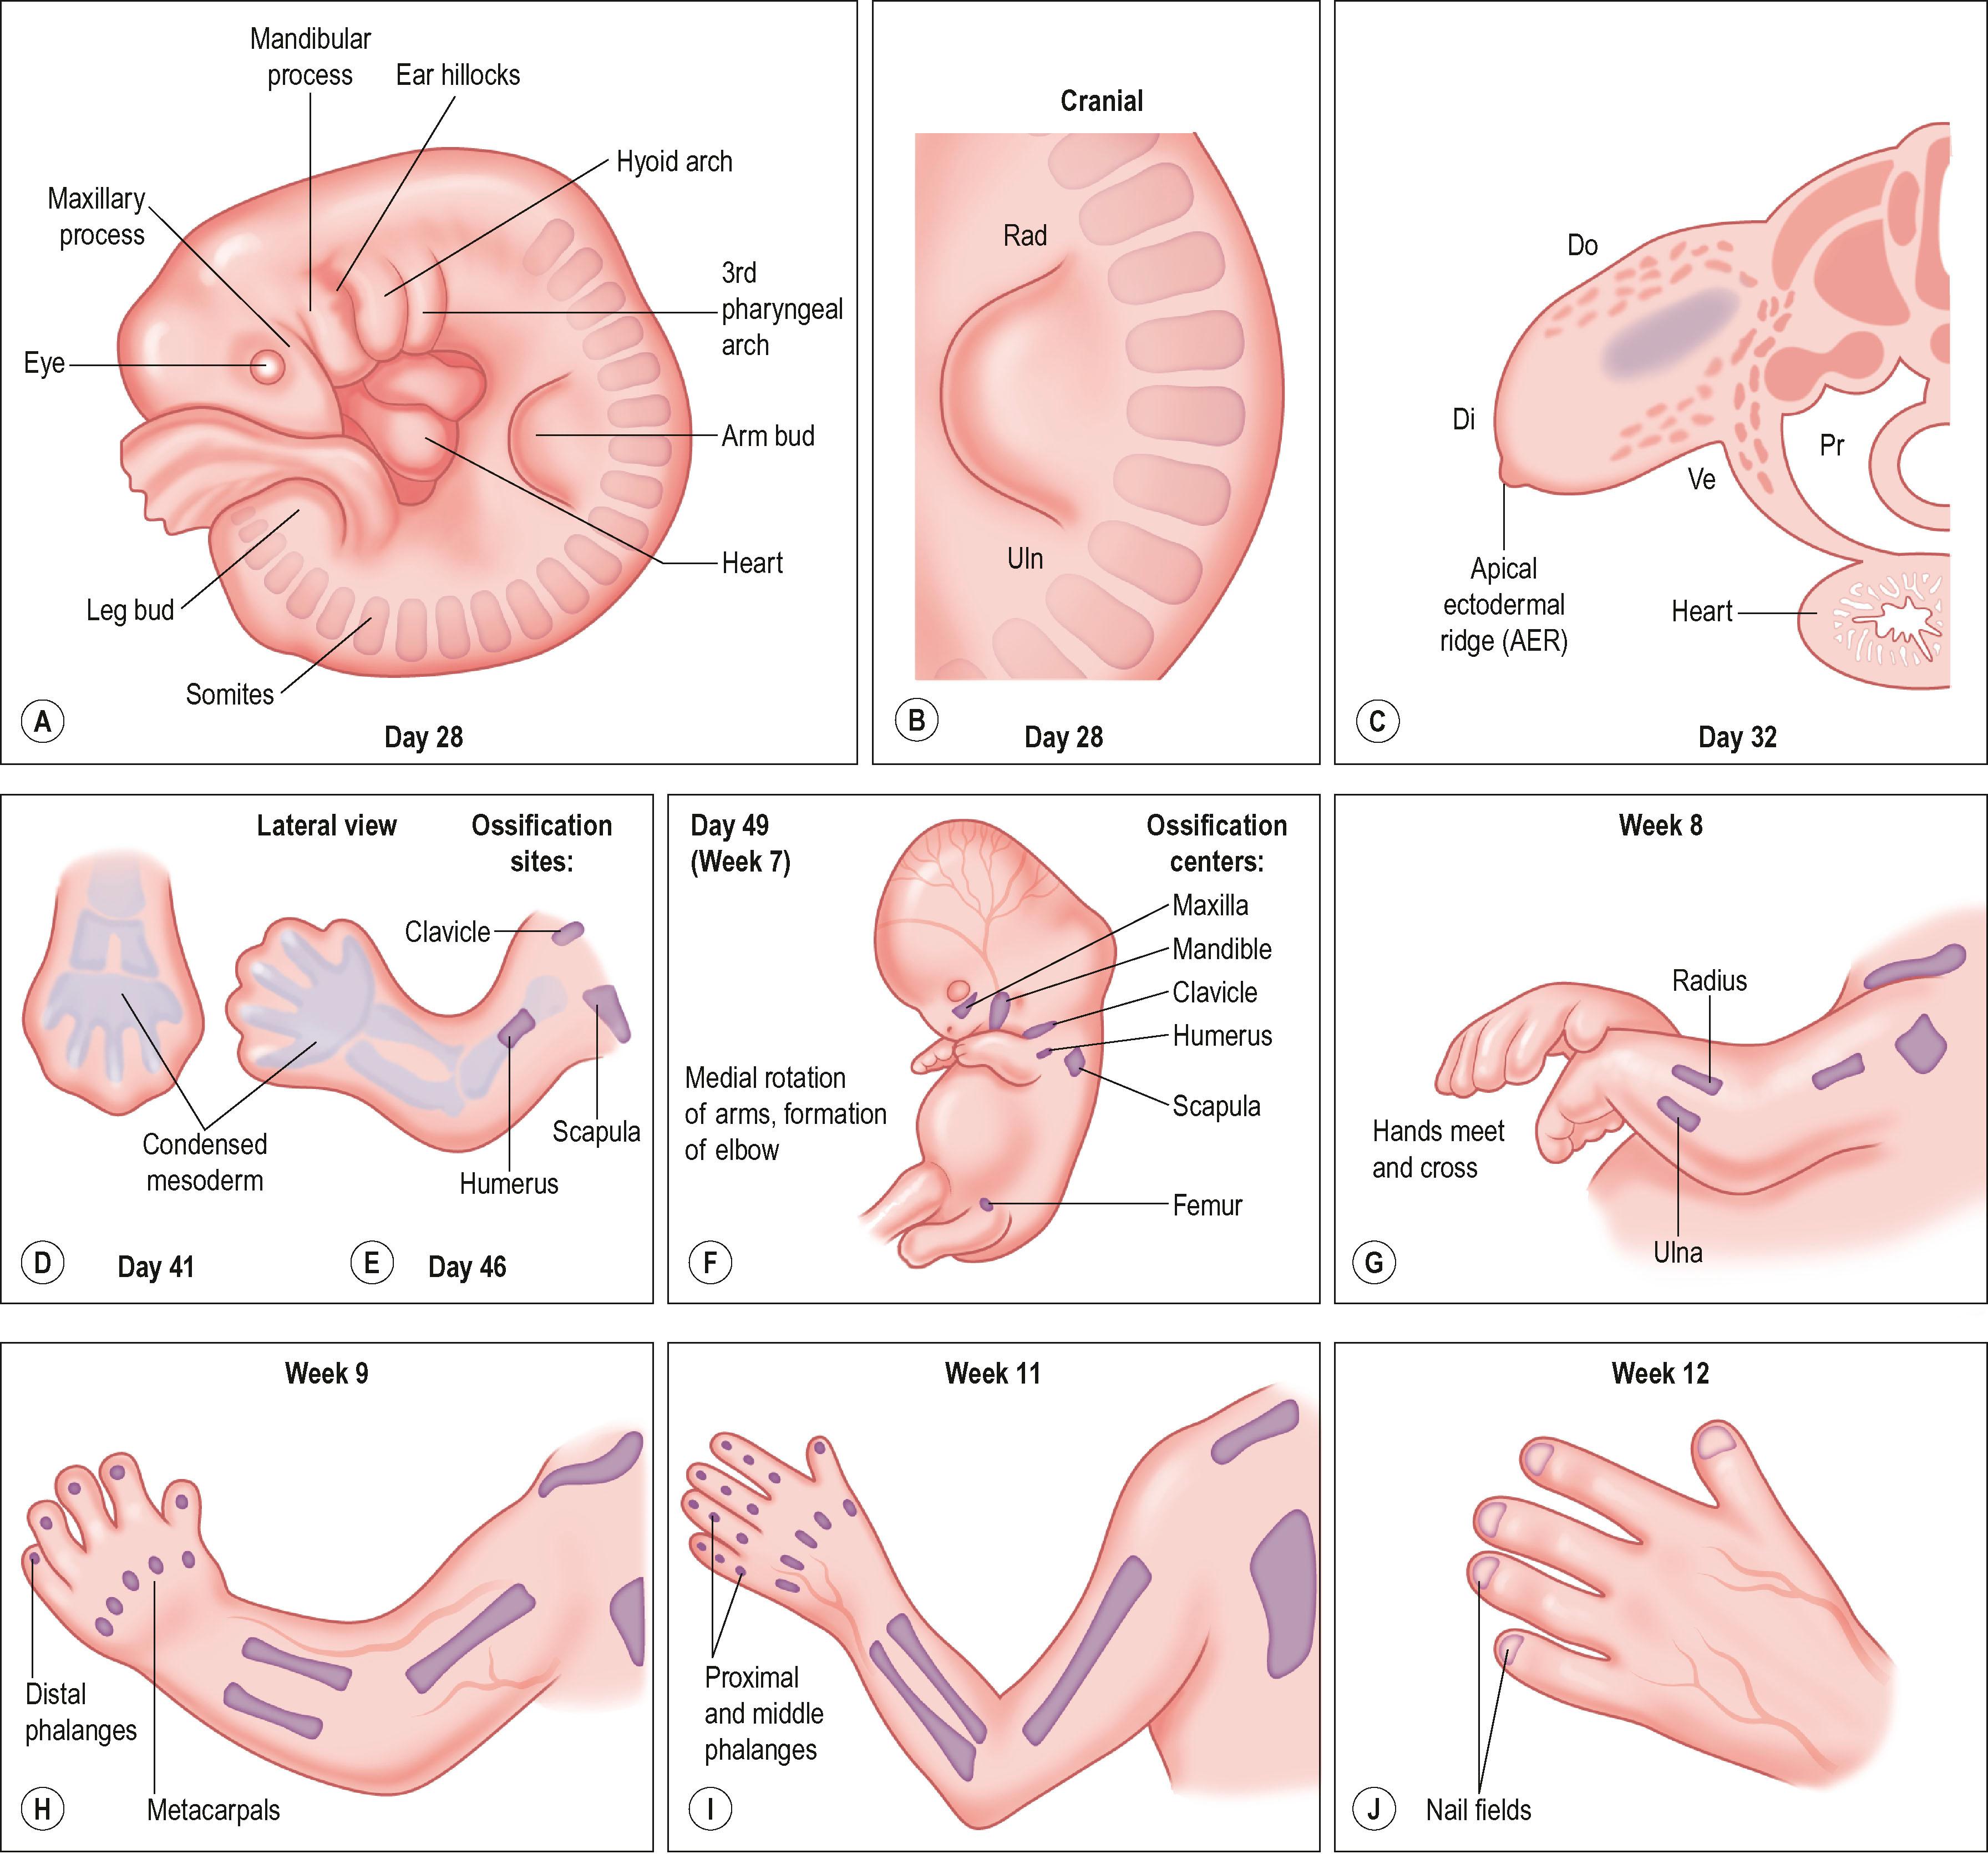 Figure 32.1, Upper limb and hand development. (A) Human embryo at Carnegie stage 13 (about 28 days of development), showing early limb buds. (B) Close-up dorsal view of the arm bud. The anterior or radial (Rad) aspect is cranial and the posterior or ulnar (Uln) aspect is caudal. (C) Cross-section through an upper limb bud at 32 days of development (Carnegie stage 14), showing dorsal (Do)–ventral (Ve) limb bud flattening and the thickened apical ectodermal ridge at the distal tip of the limb bud (that runs along the dorsal–ventral border from anterior to posterior). Pr, proximal; Di, distal. (D) The hand plate at 41 days of development (Carnegie stage 17). The scalloped edge conforms to the condensing digital mesenchyme. (E) Limb at 46 days of development (Carnegie stage 19). Separate fingers are evident. The proximal limb skeleton is well developed and ossification has begun in the humerus and shoulder girdle. (F) The embryo at 49 days of development (Carnegie stage 20), showing ossification centers in the upper limb, lower limb, and face. Note that upper limb development is more advanced than lower limb development. (G) Upper limbs at week 8 (Carnegie stage 22). The fingers are completely separate and ossification centers have developed in the forearm, i.e., radius and ulna. (H) The upper limb at week 9 (Carnegie stage 23). Metacarpal and distal phalangeal ossification has begun. (I) The upper limb at week 11. Ossification in proximal and middle phalanges is now evident in addition to distal phalanges and metacarpals. ( J ) The hand at week 12, showing developing nail fields (nails become visible during week 16).